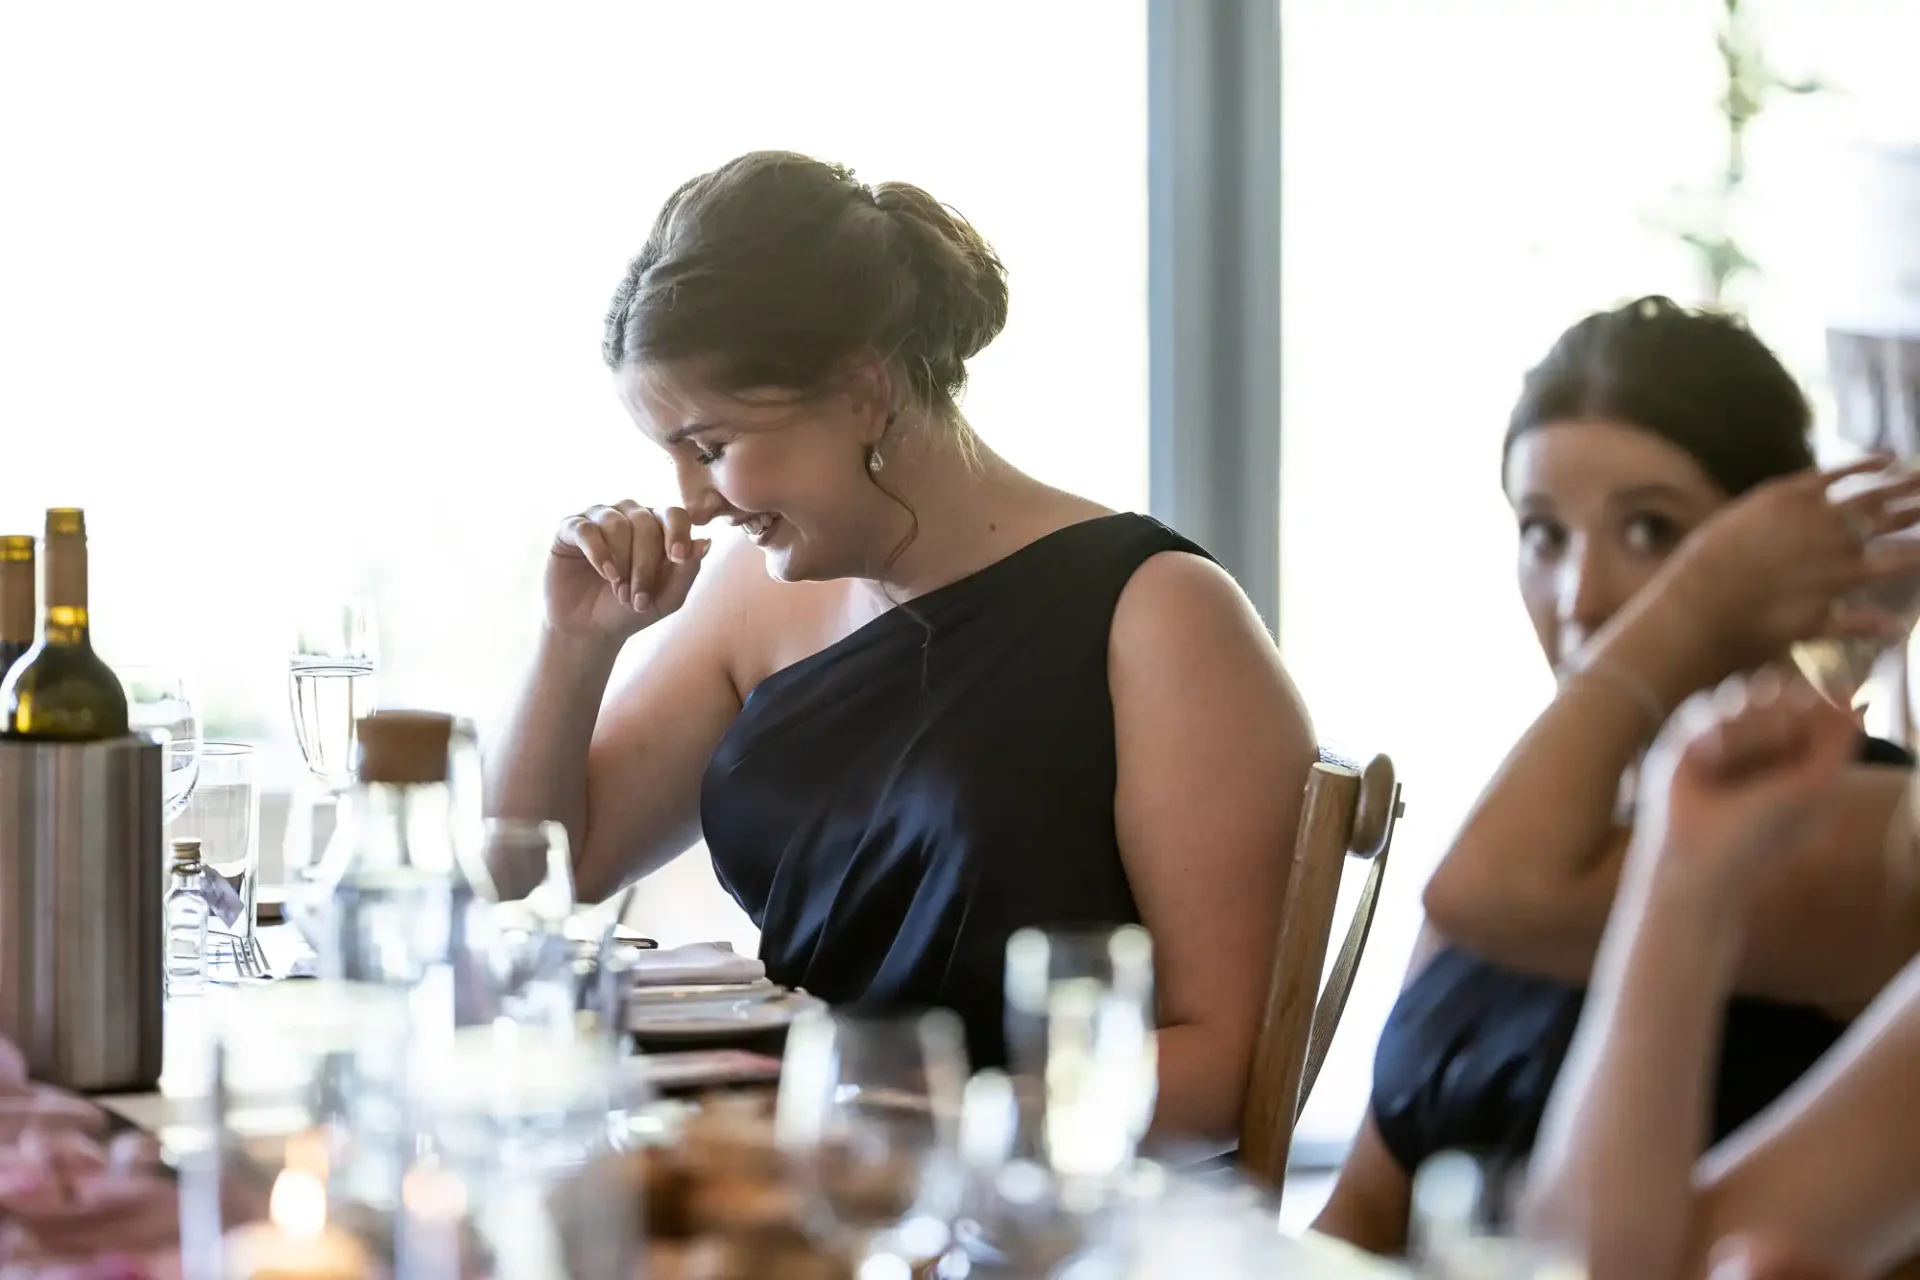 A woman in a black dress seems emotionally moved at a dinner table, with another person looking on.